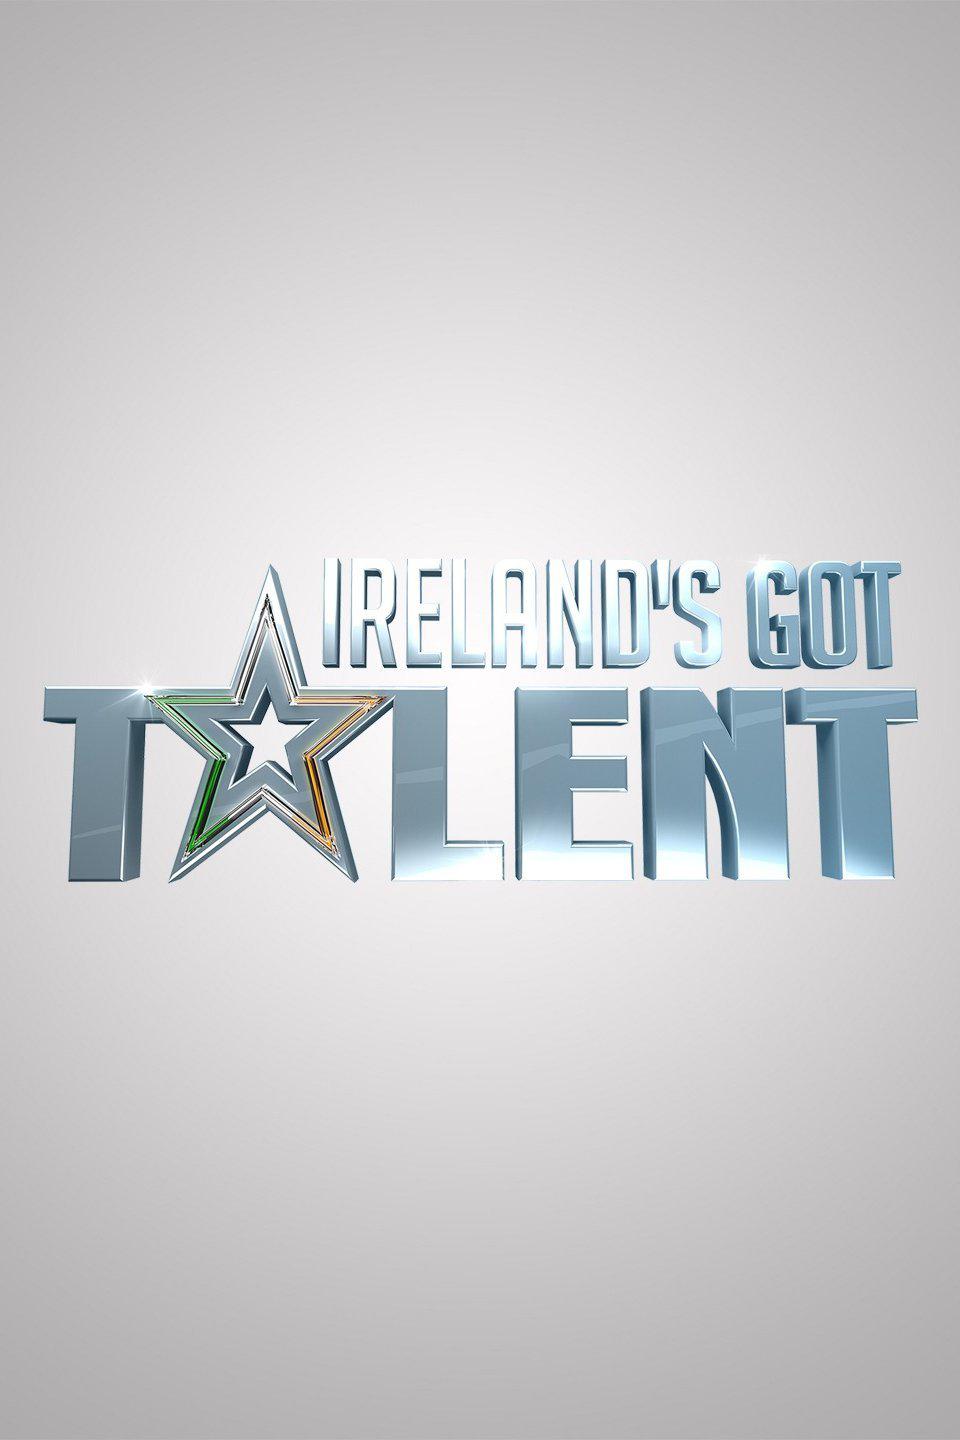 TV ratings for Ireland's Got Talent in Rusia. TV3 TV series